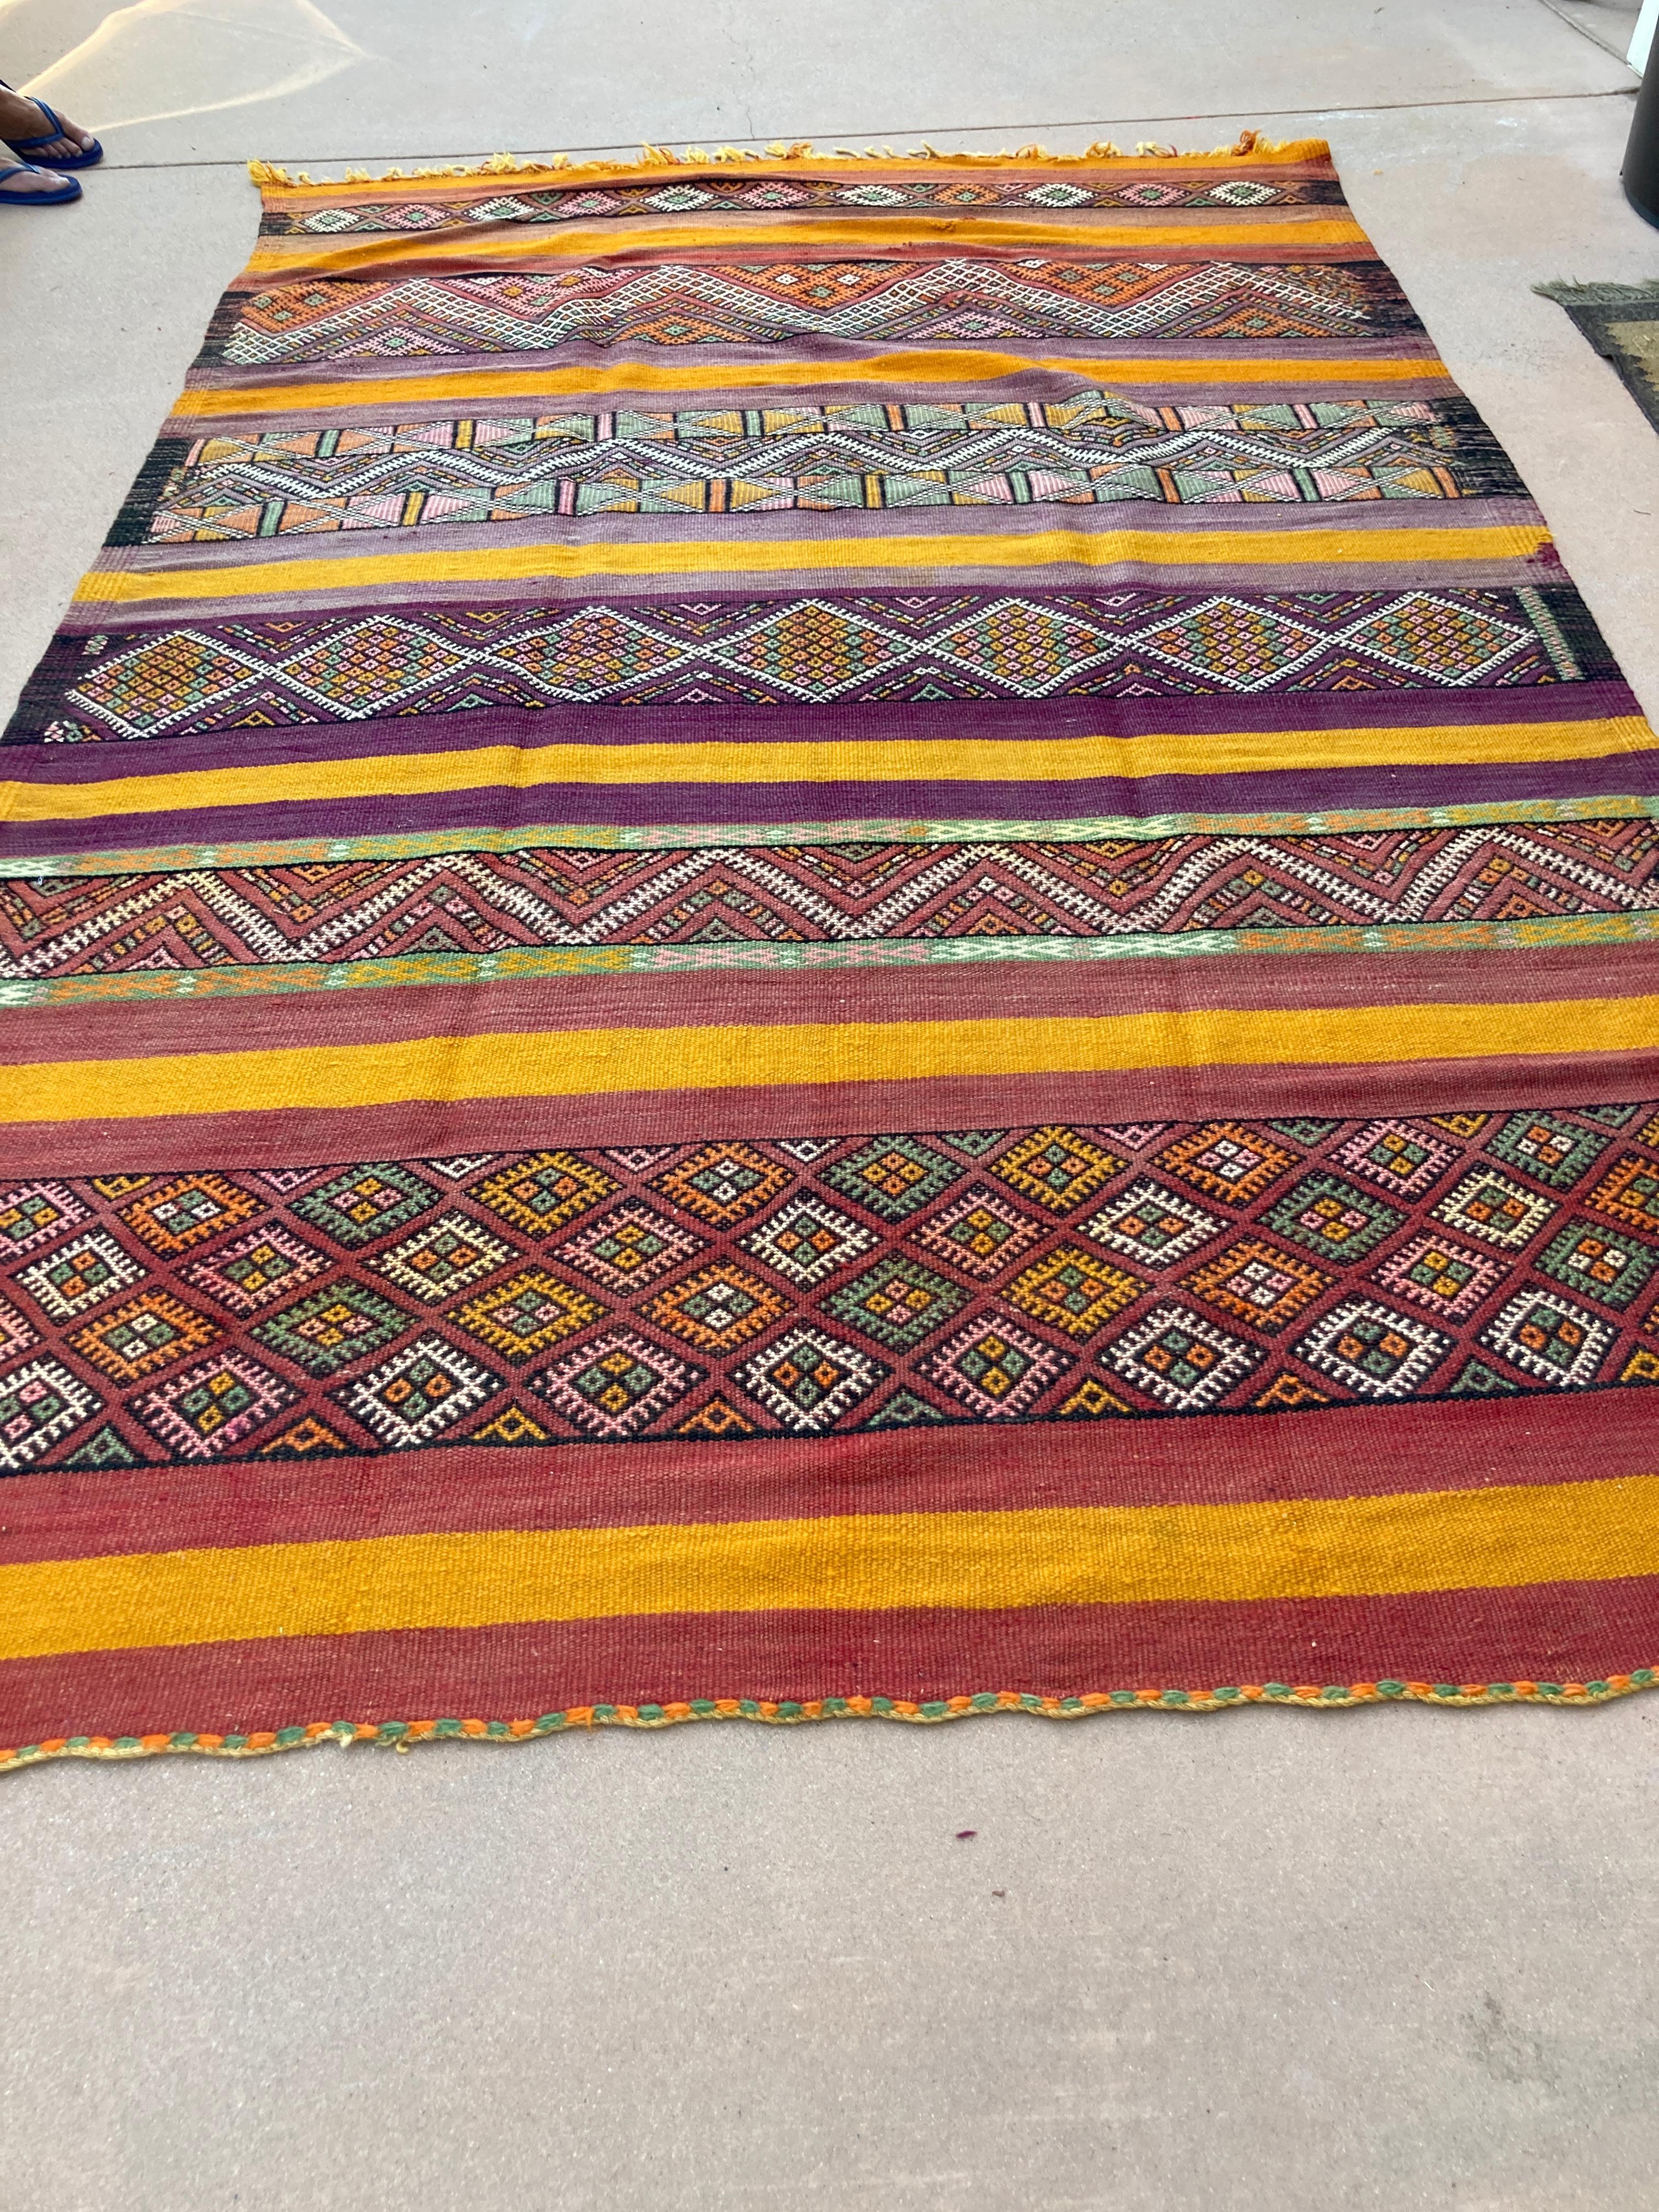 Hand-Woven 1960s Vintage Flat-Weave Berber Moroccan Rug For Sale